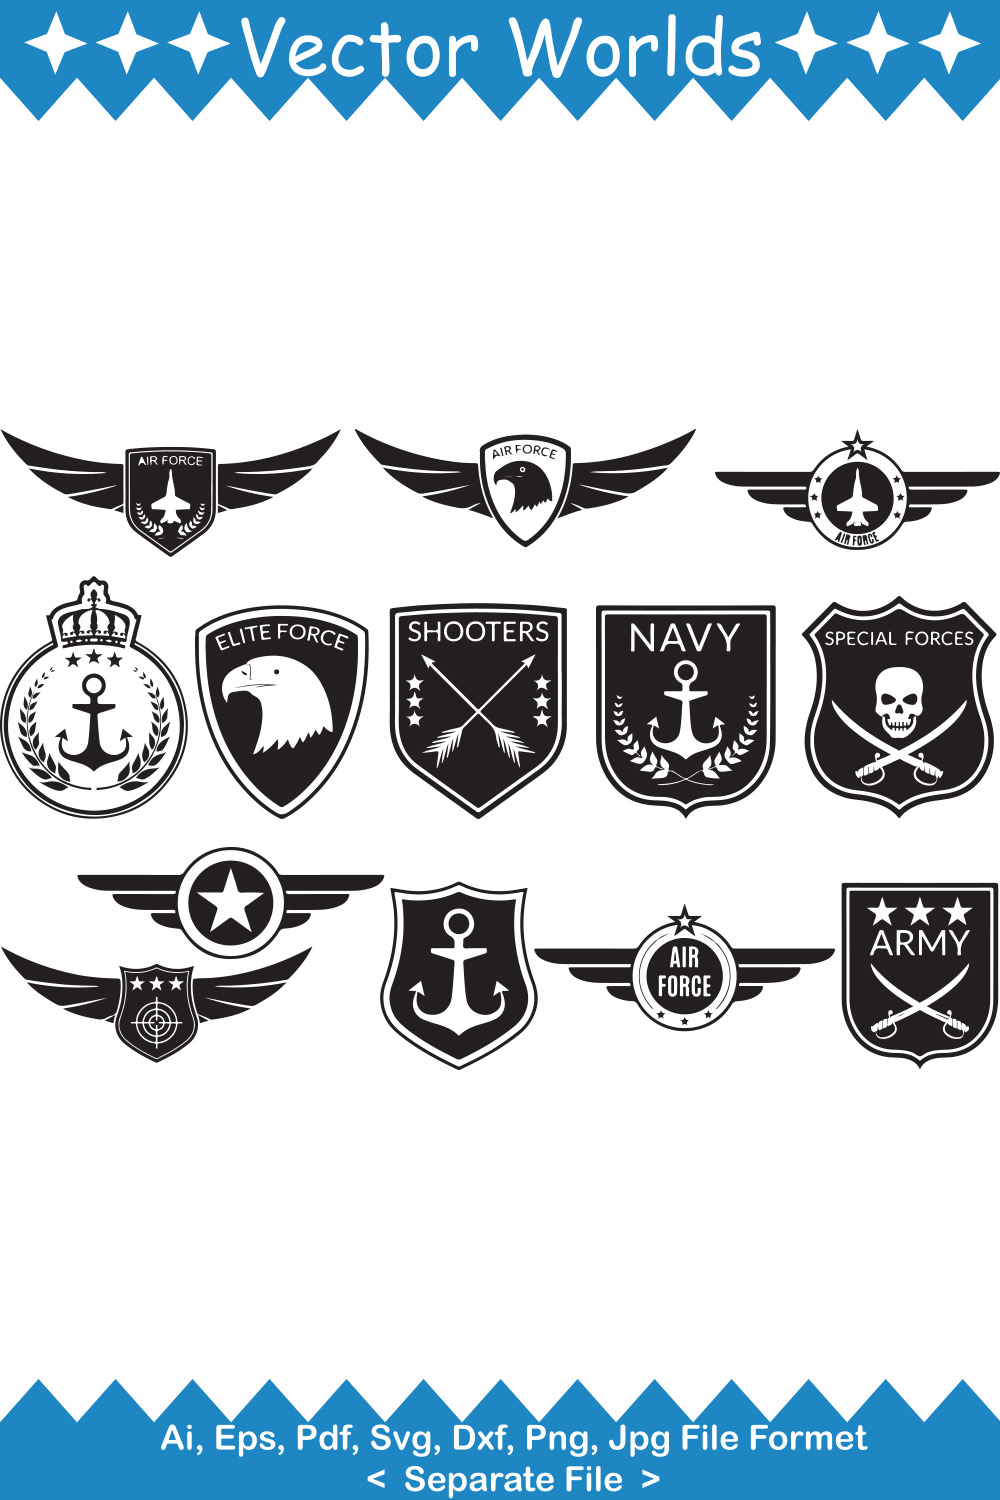 special forces logo vector